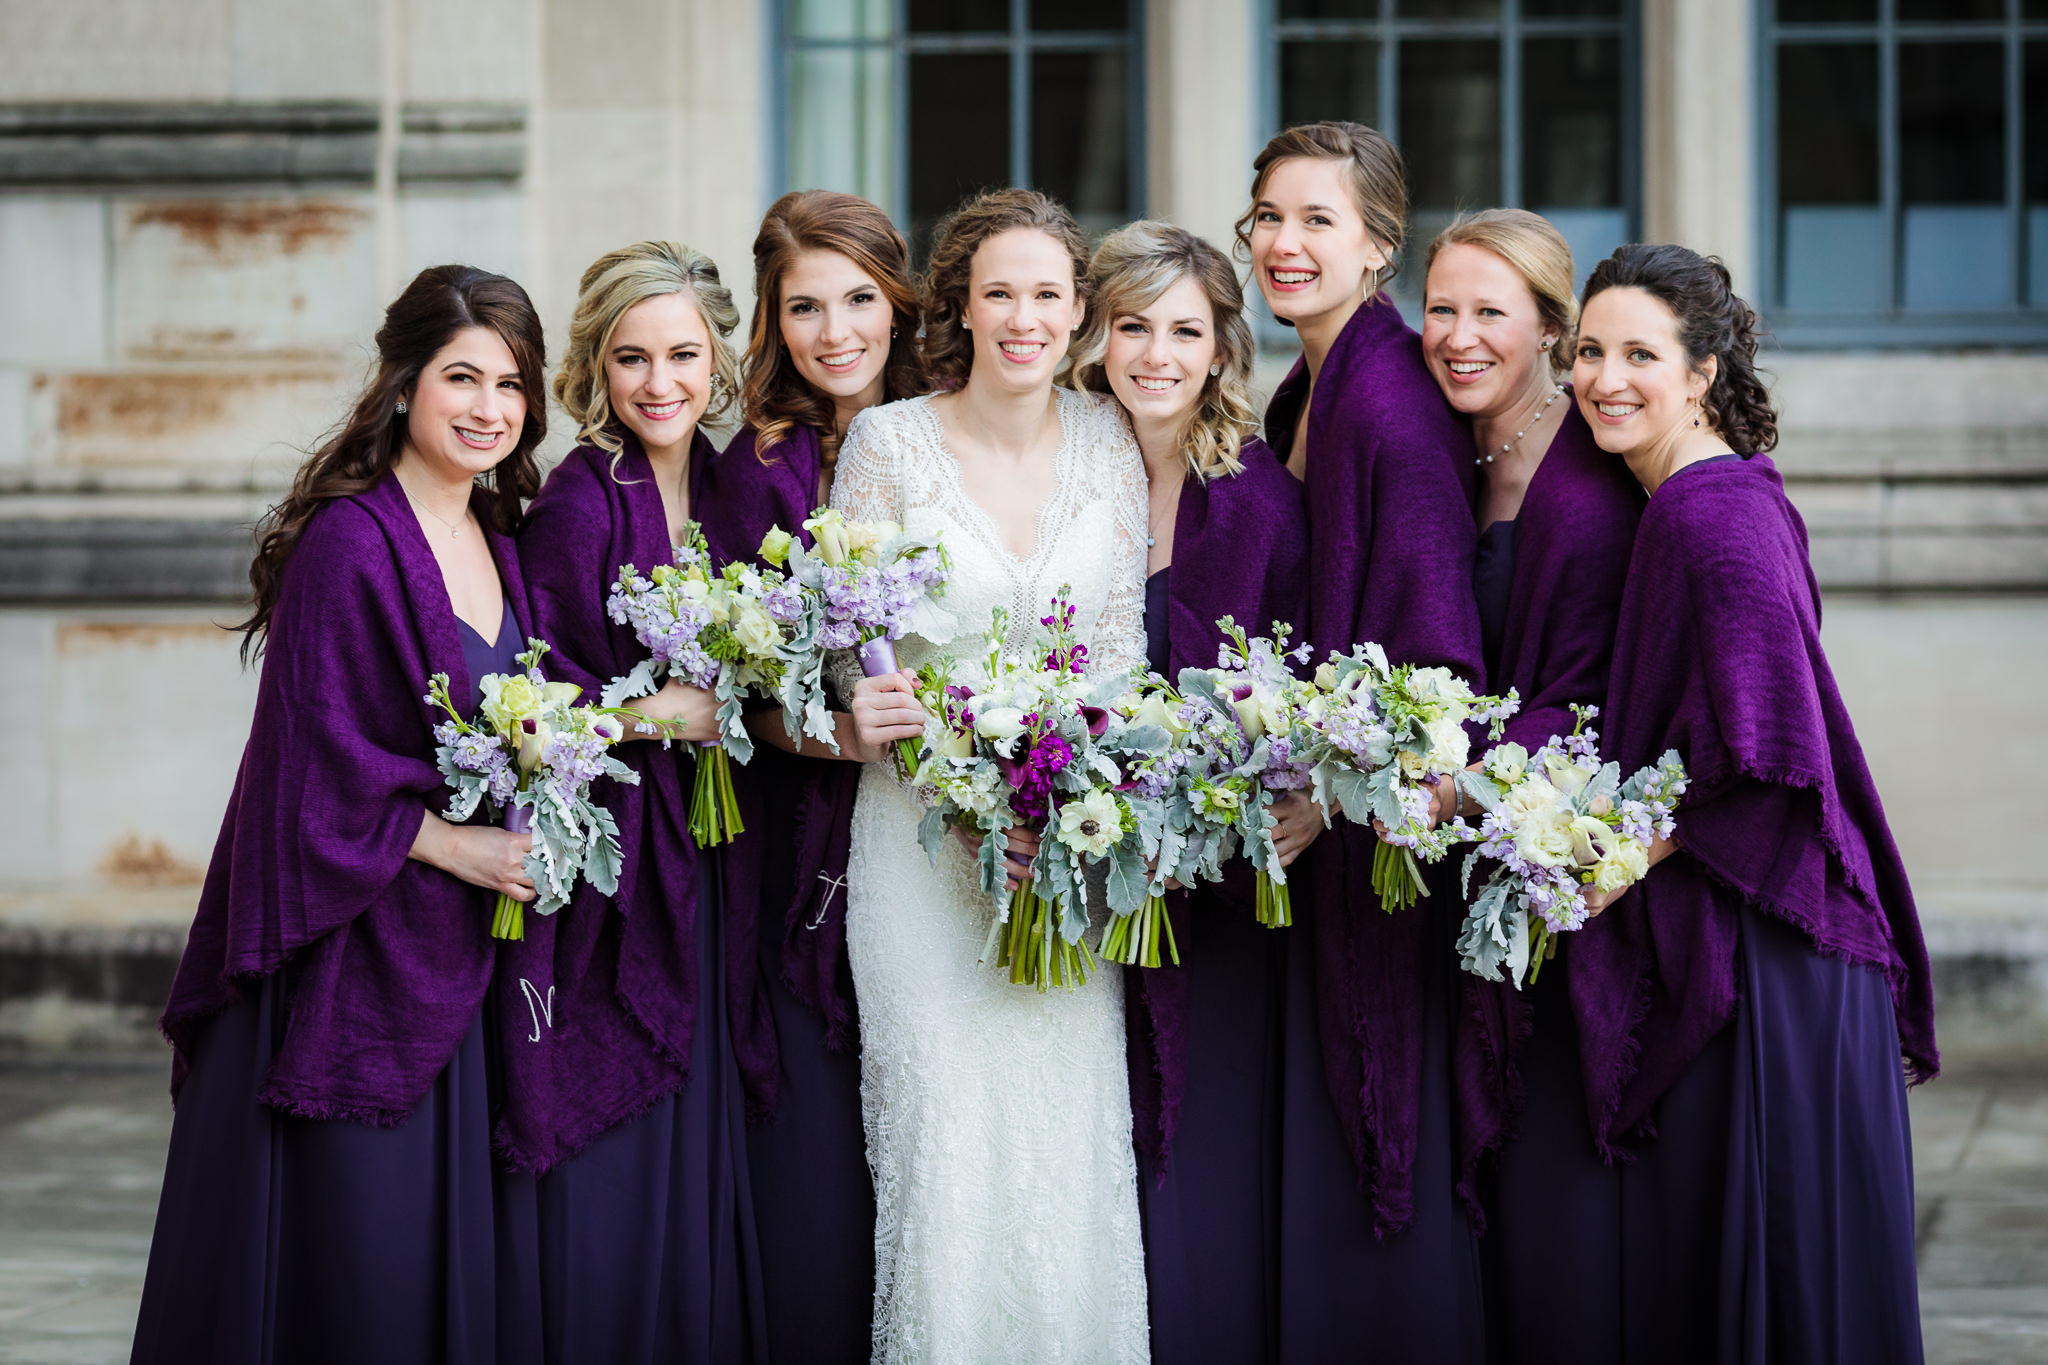 Bride with her bridesmaids in purple Bill Levkoff dresses from Bridal Beginning and flowers by Holly Hanna Floral